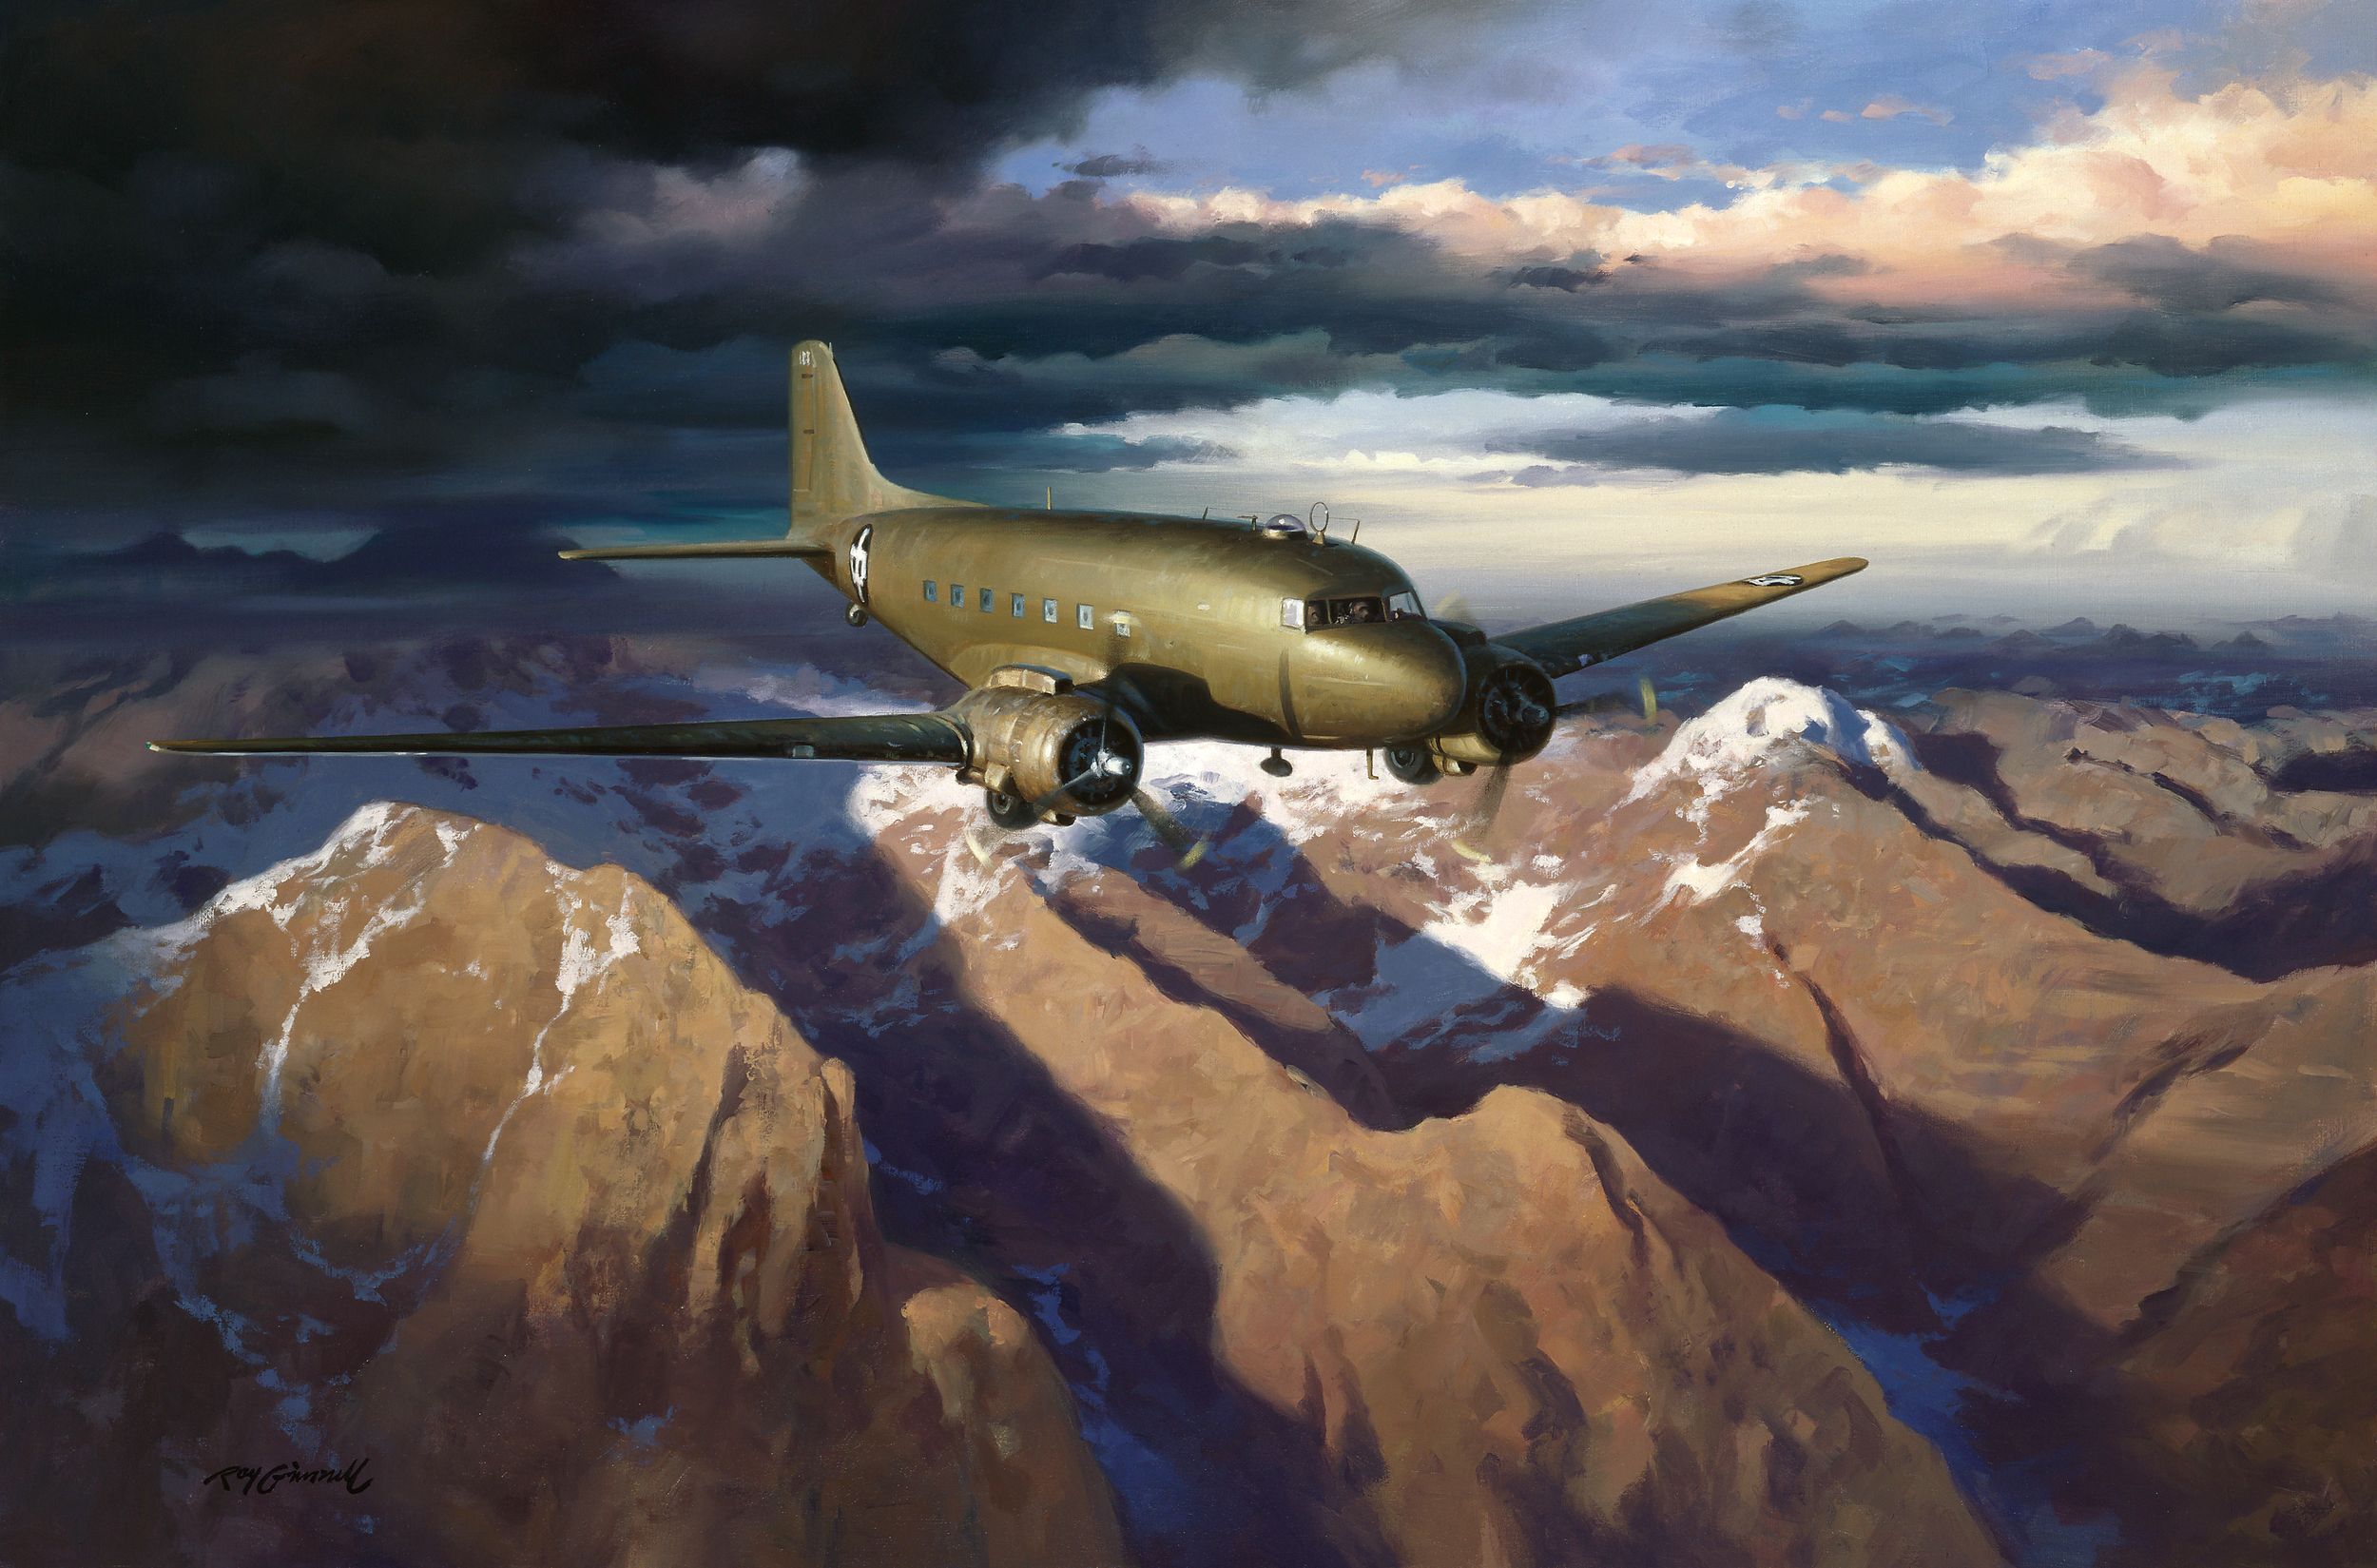 “Over the Top of the World” by Roy Grinell. Pilots flying this treacherous route over the Himalayas kept Allied supply lines open.